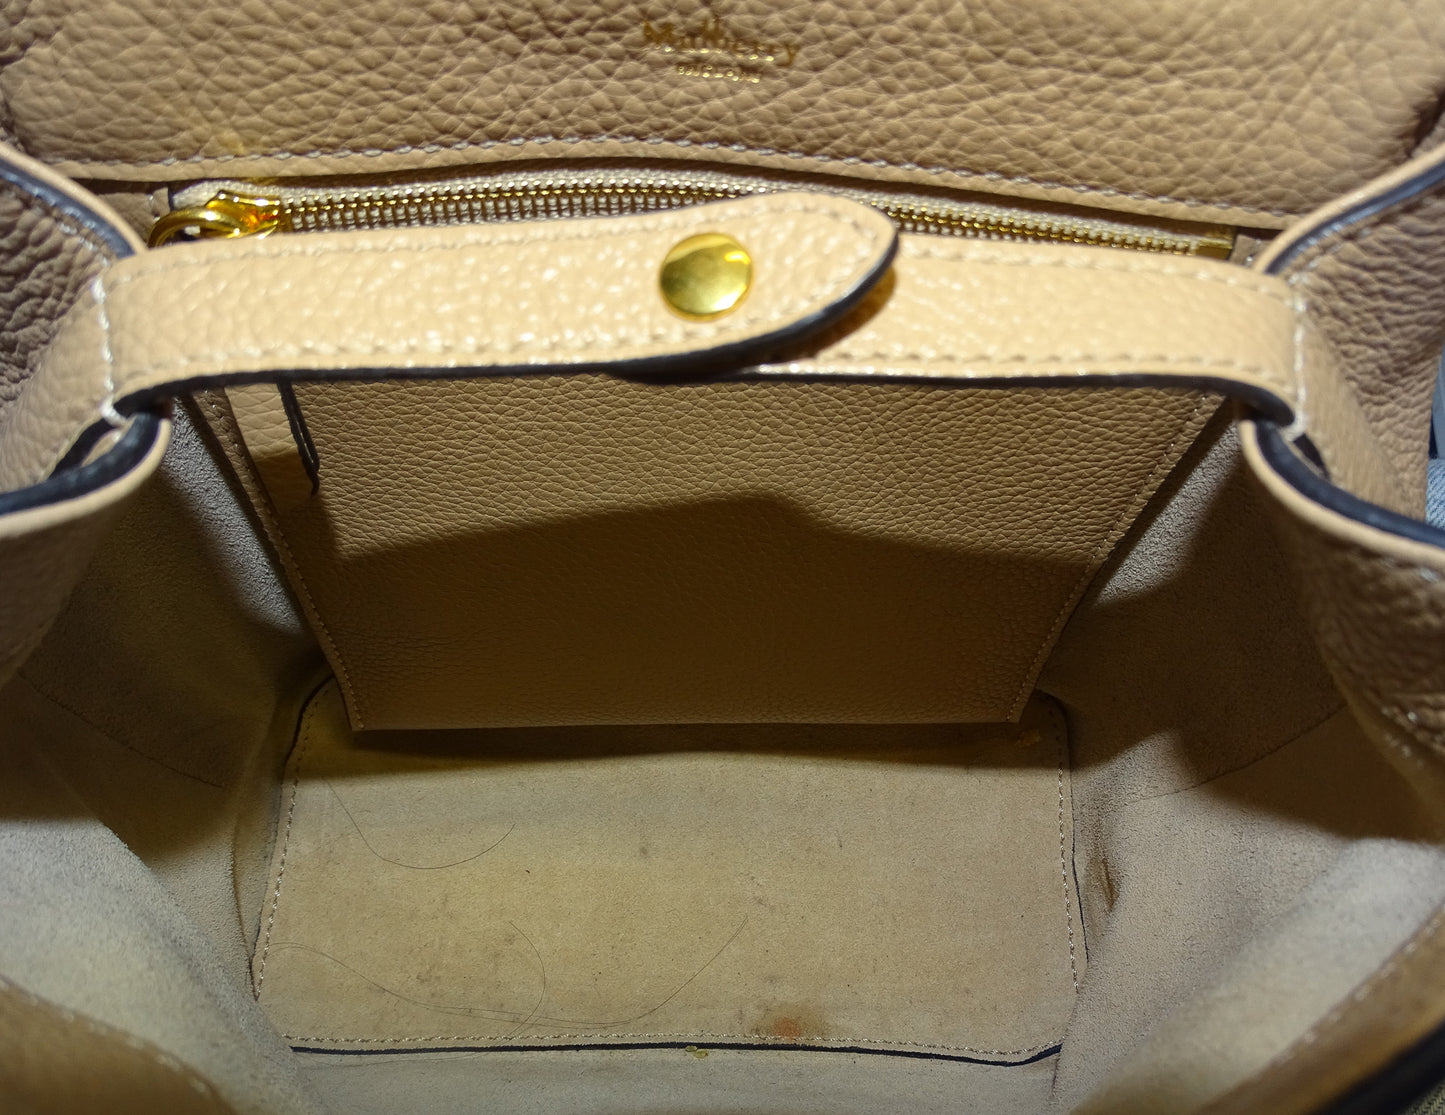 Mulberry Beige Leather Bayswater Backpack